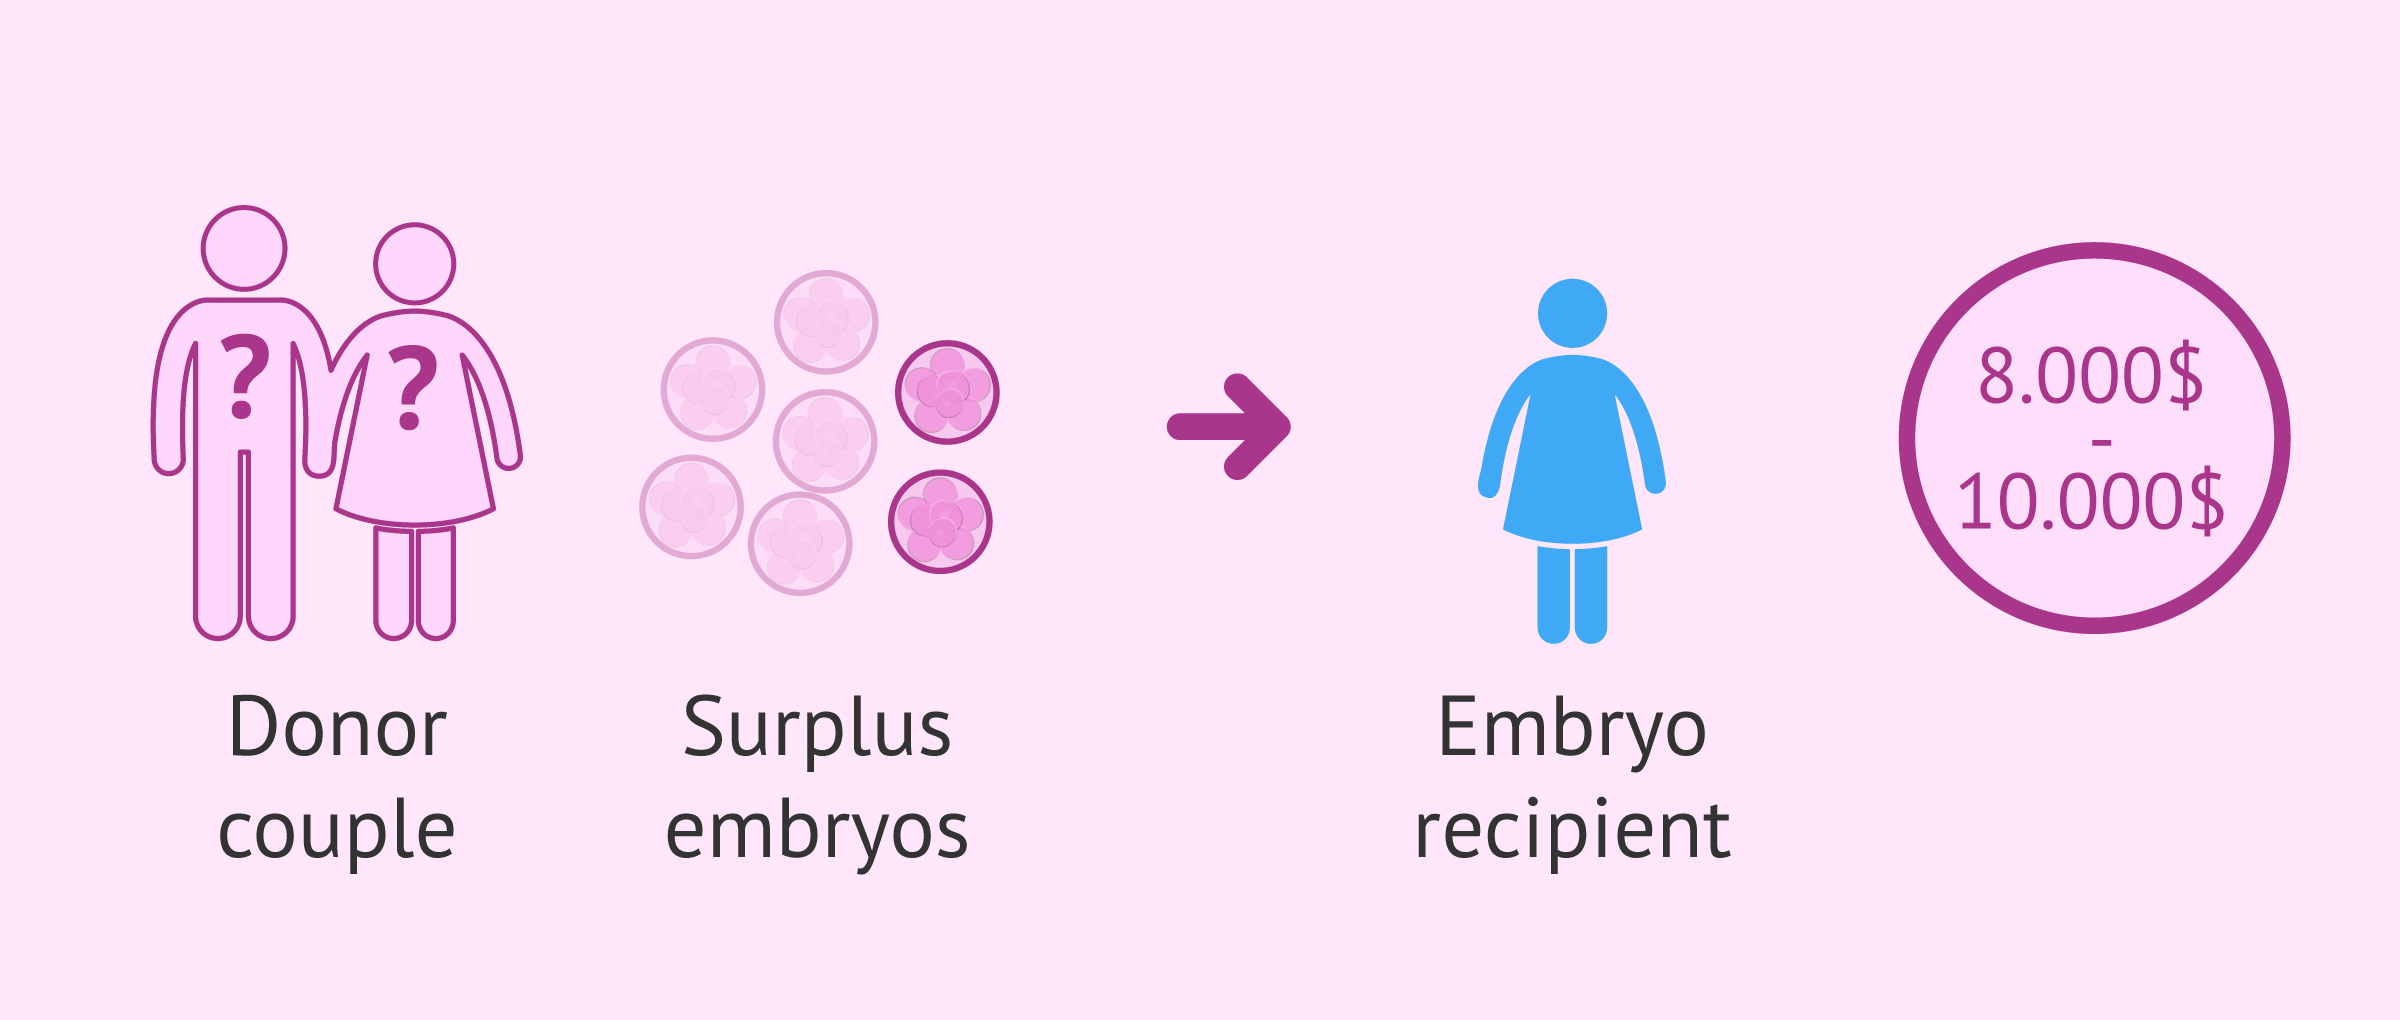 How much does embryo adoption cost?